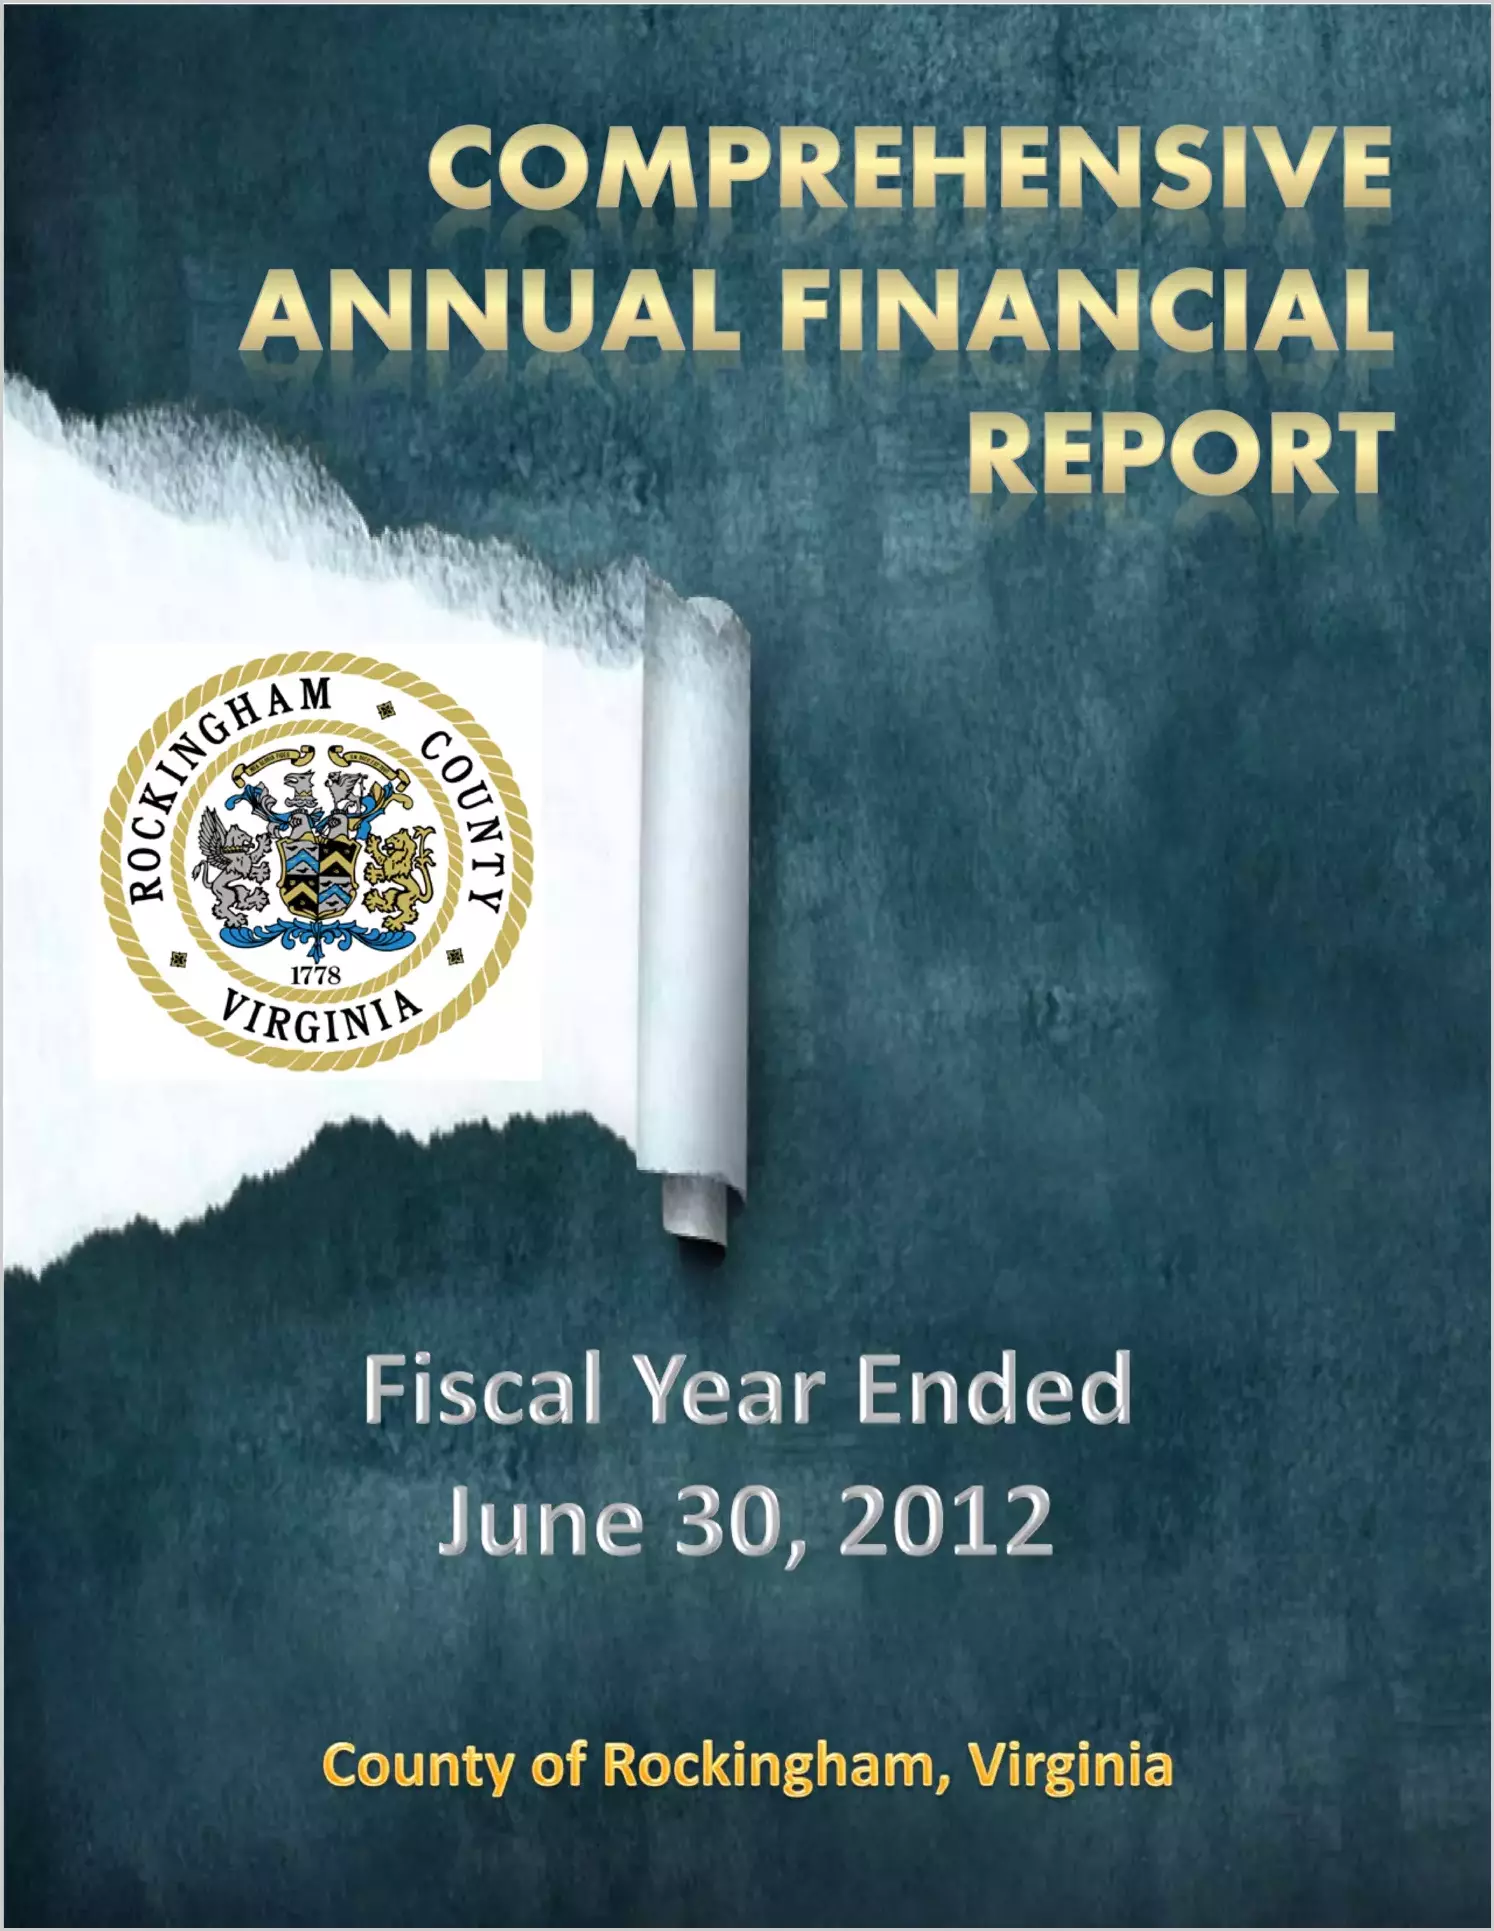 2012 Annual Financial Report for County of Rockingham